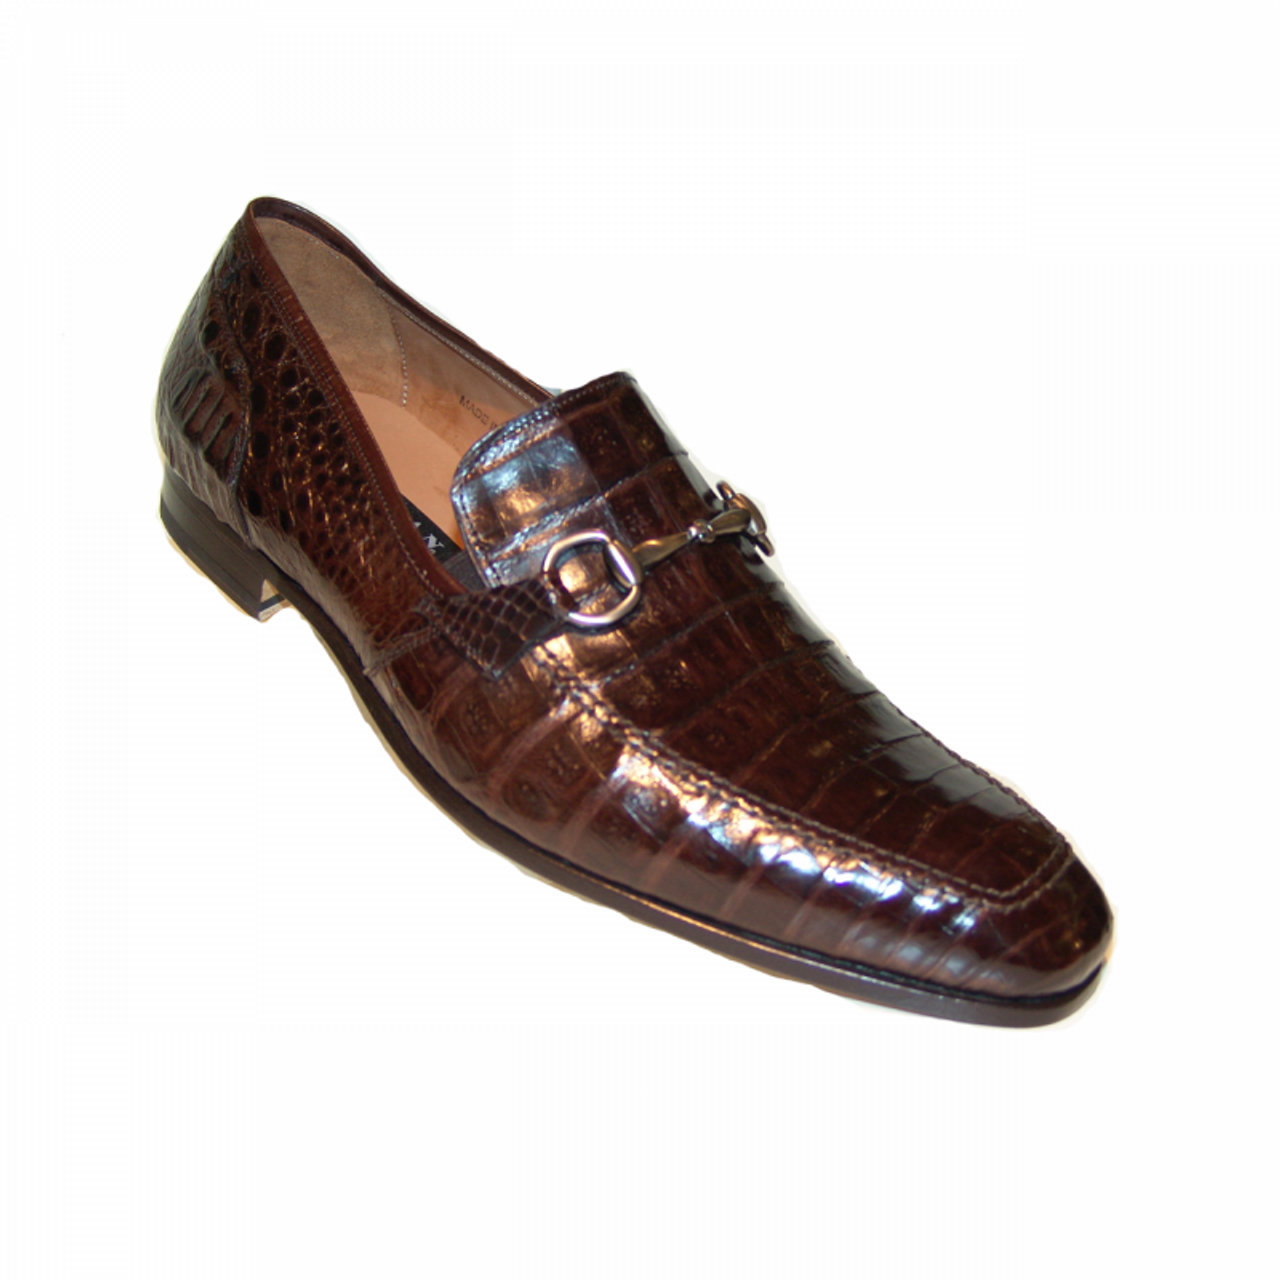 Buy And Price alligator leather skin shoes - Arad Branding